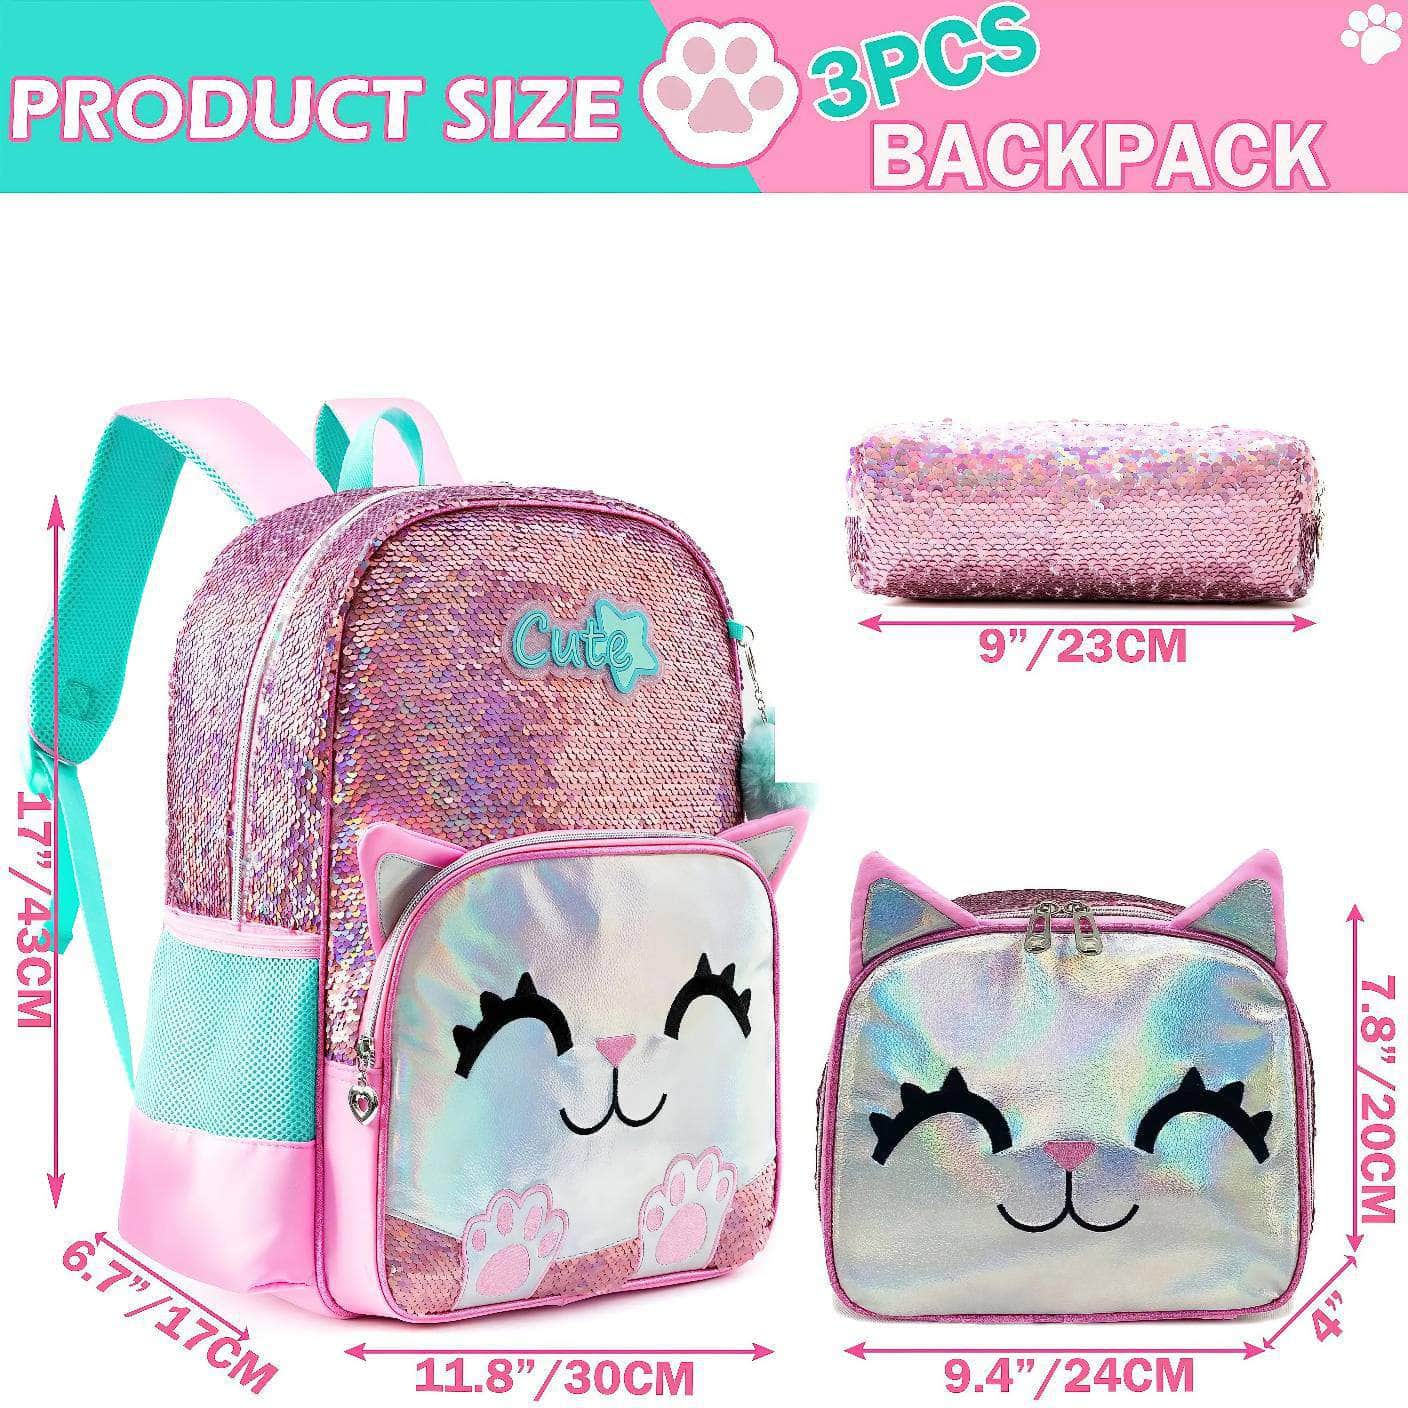 Cute Sequin Backpack Set for Girls - Ideal for School, Kindergarten, with Lunch Box & Pencil Case